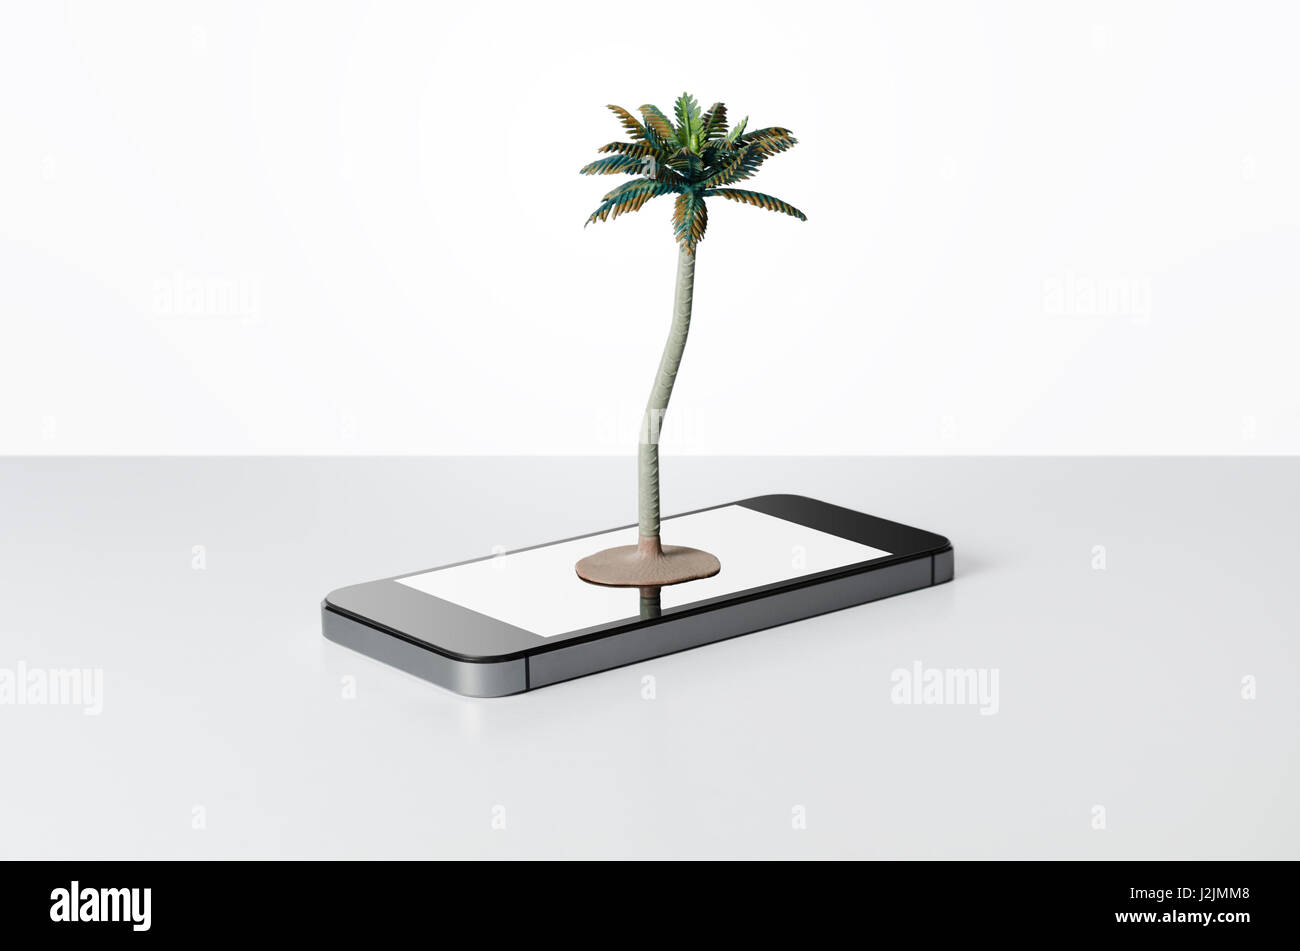 Toy palm tree on a smart phone Stock Photo